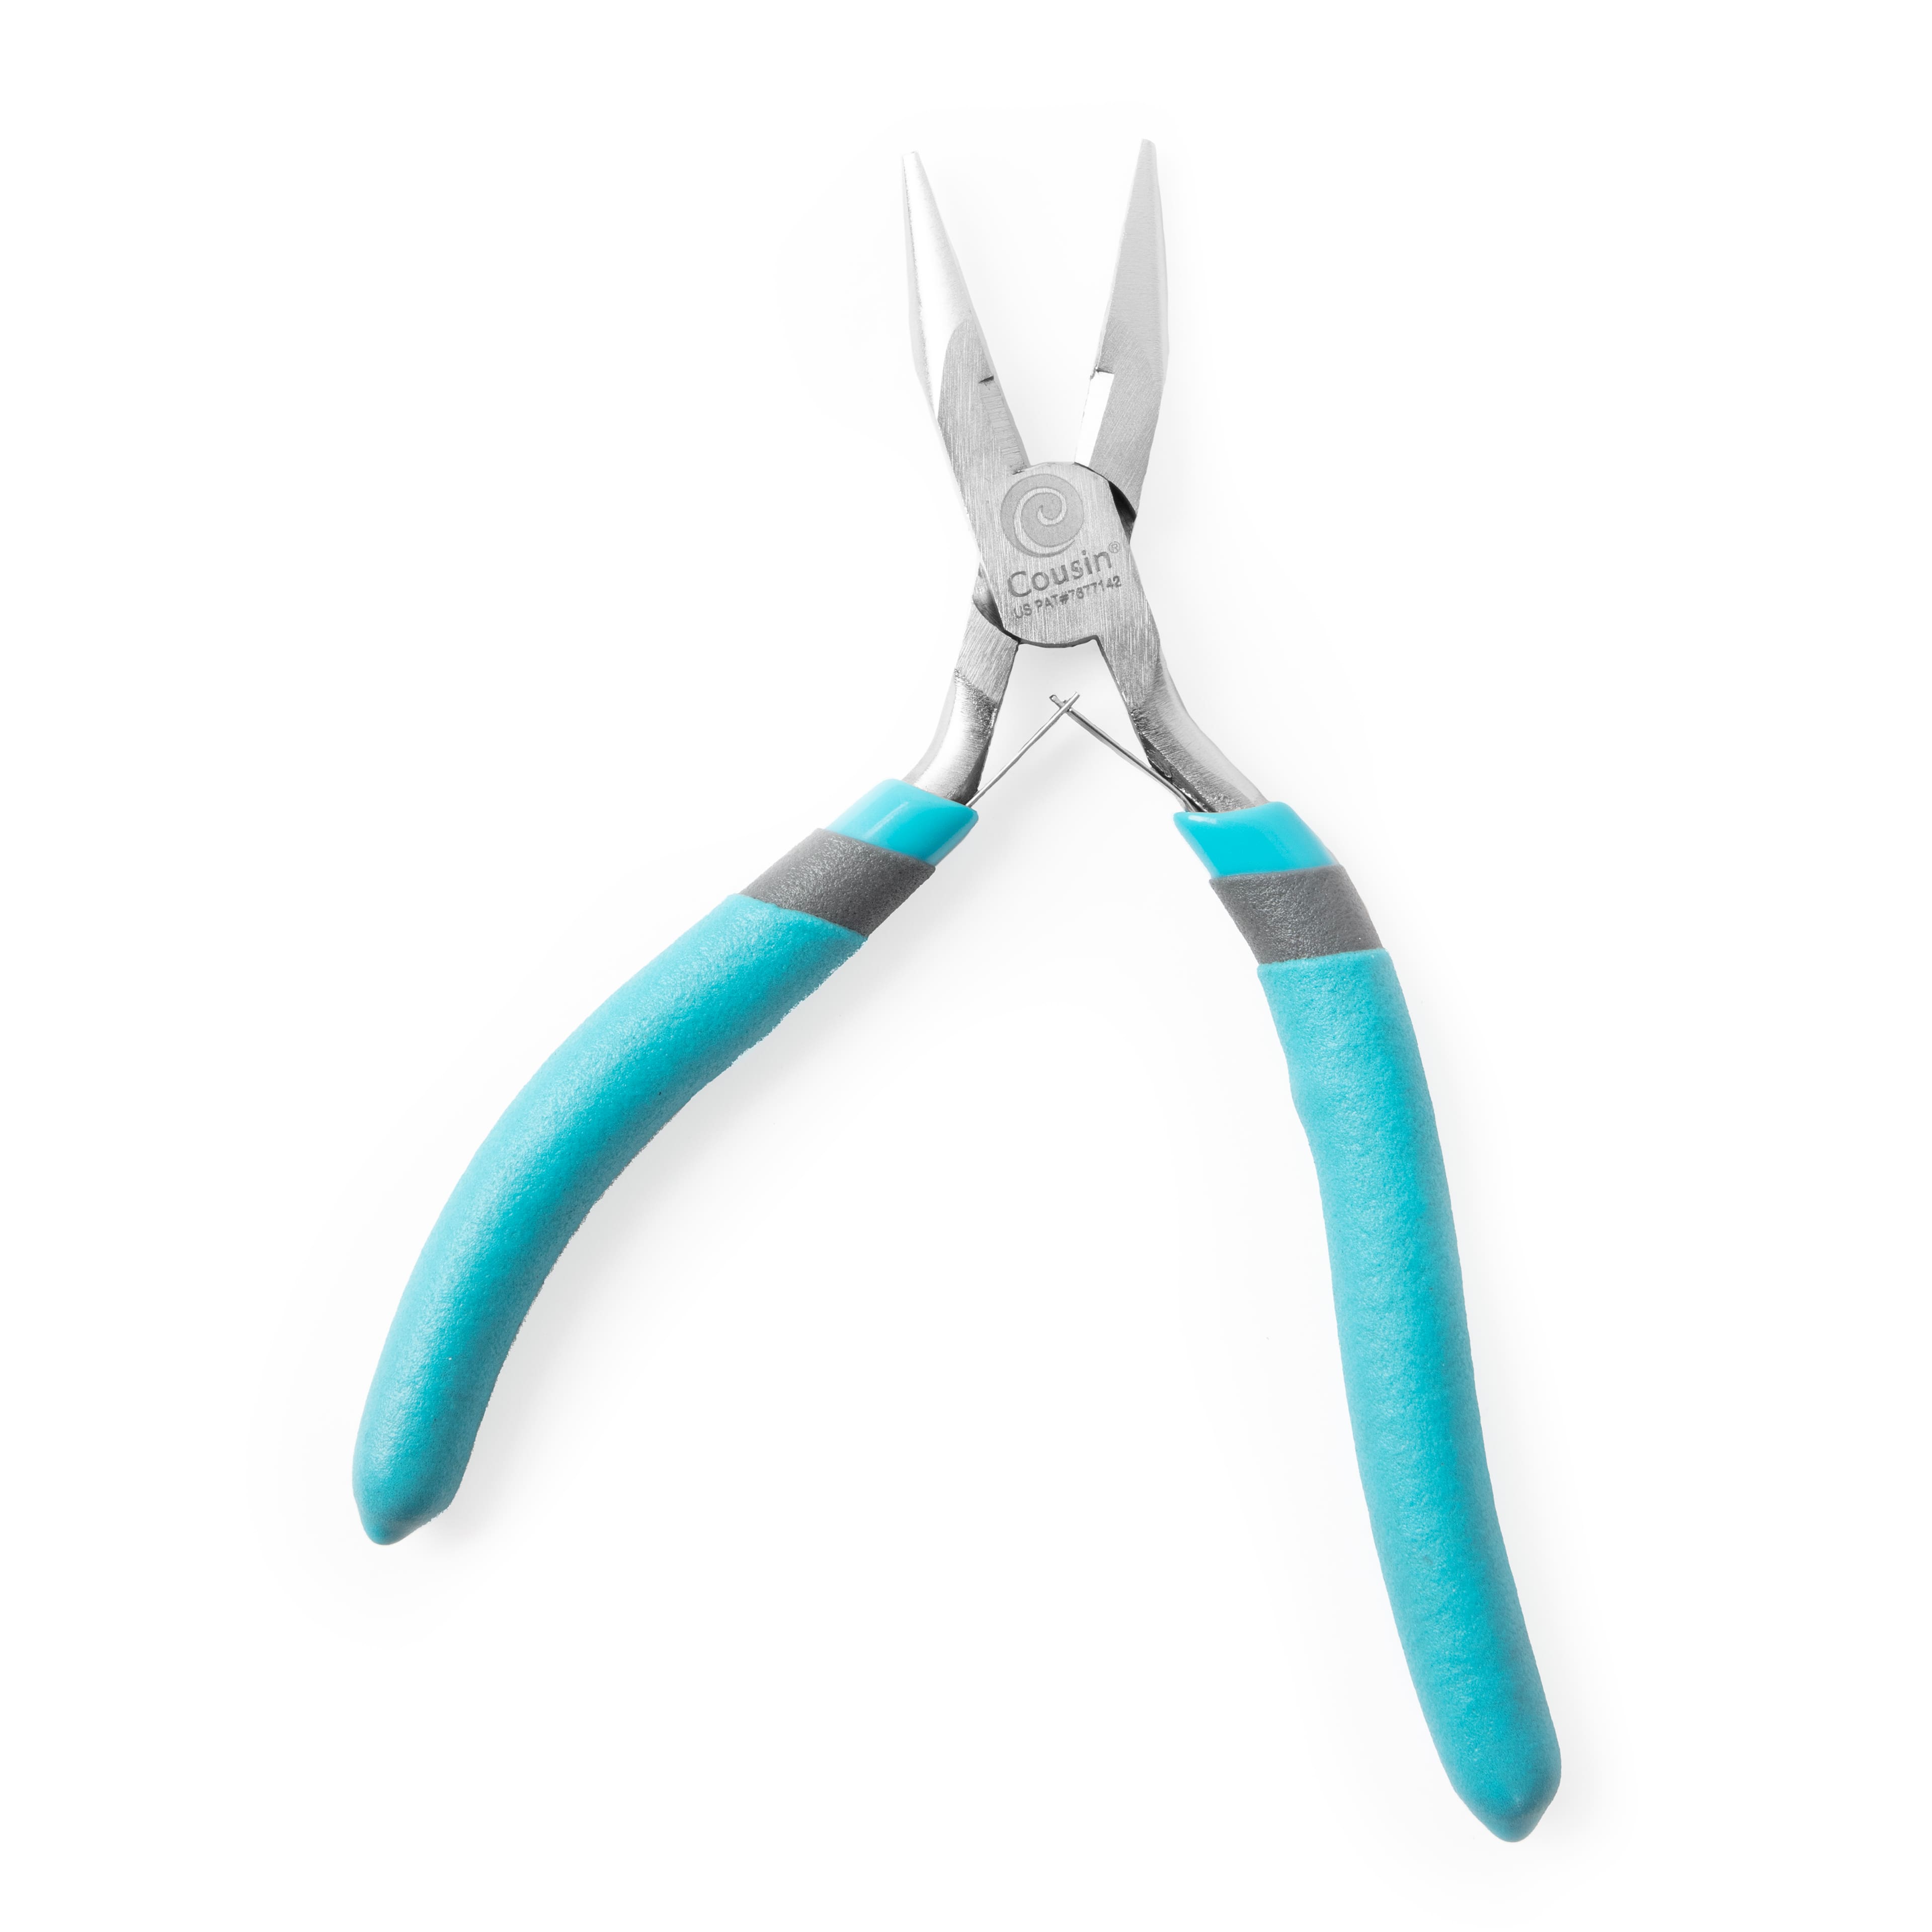 Jewelry Making Pliers Tools Precision Comfort Needle Nose or Tool